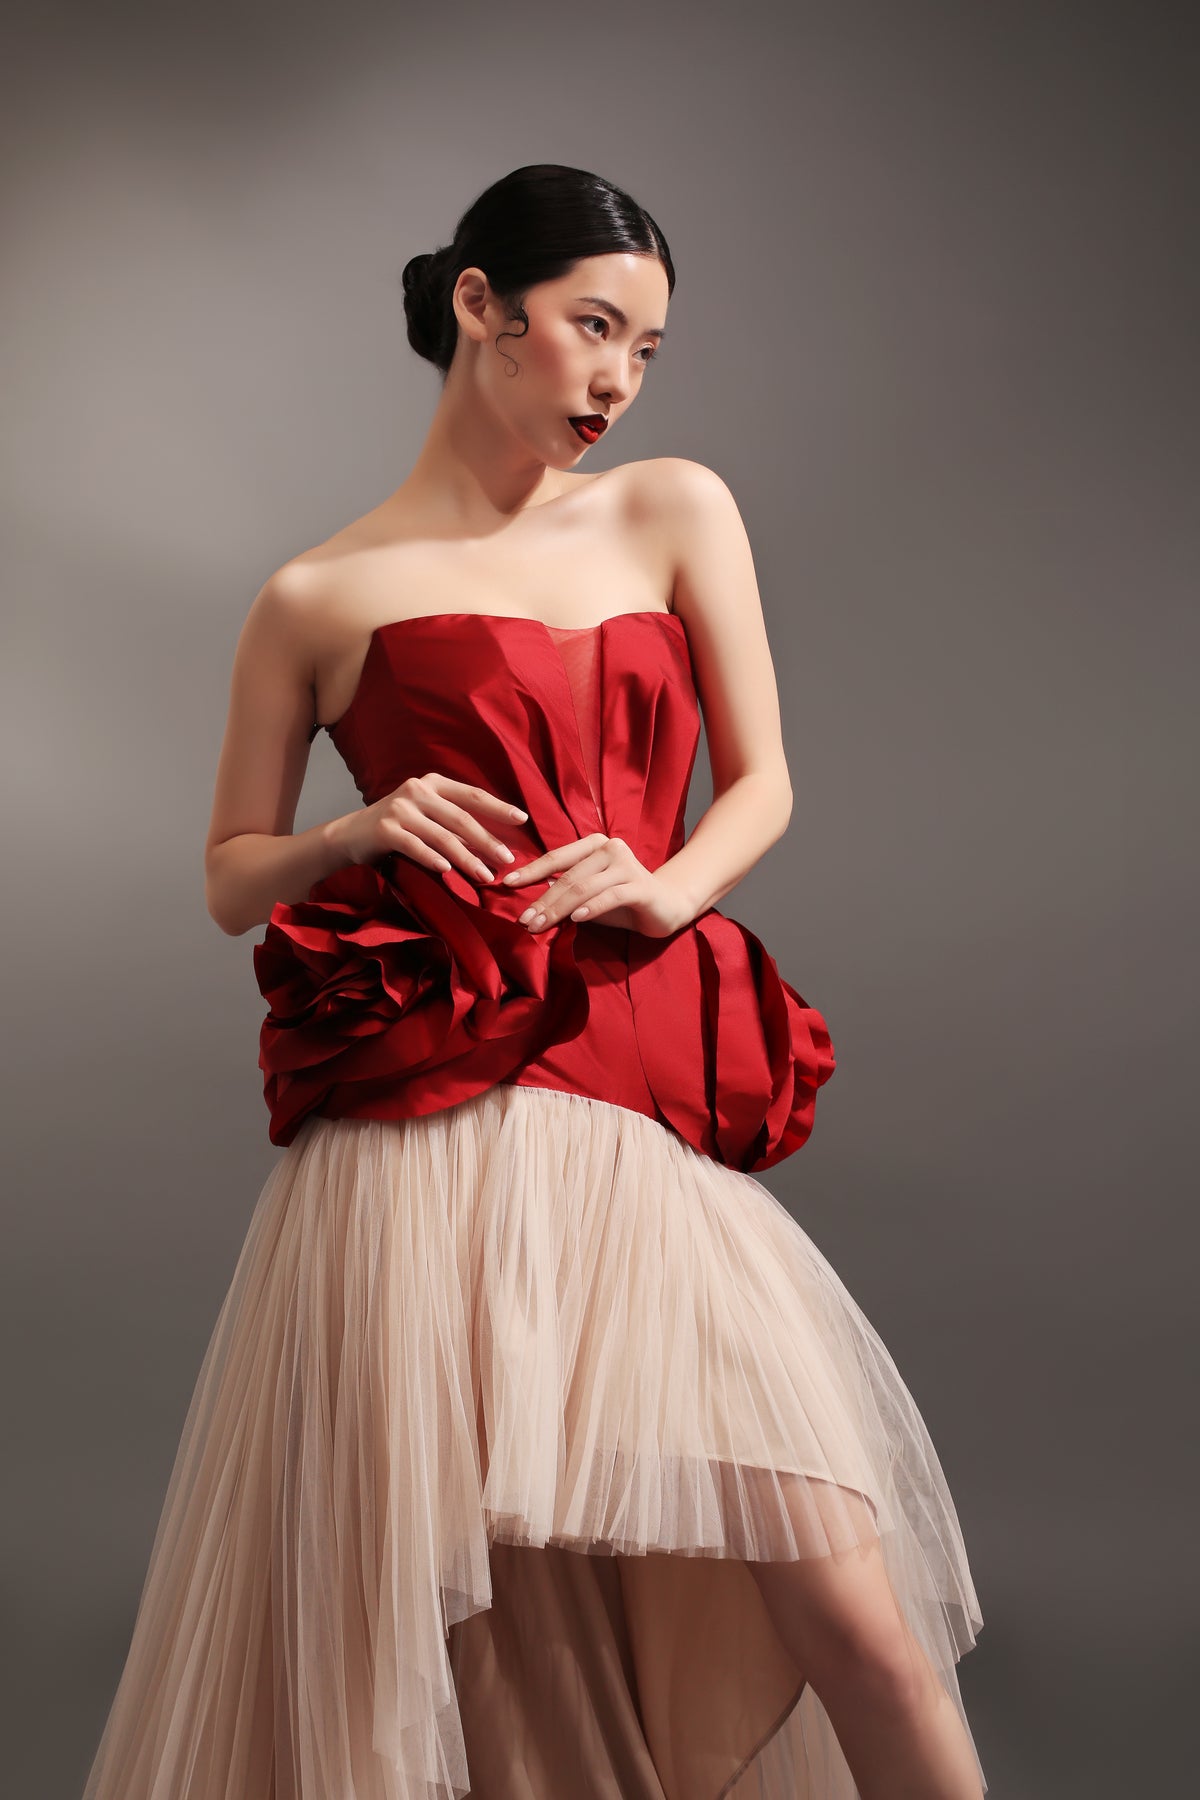 Red dress in deep v-neck cut with petals draping on hips with micro-pleated mullet skirt